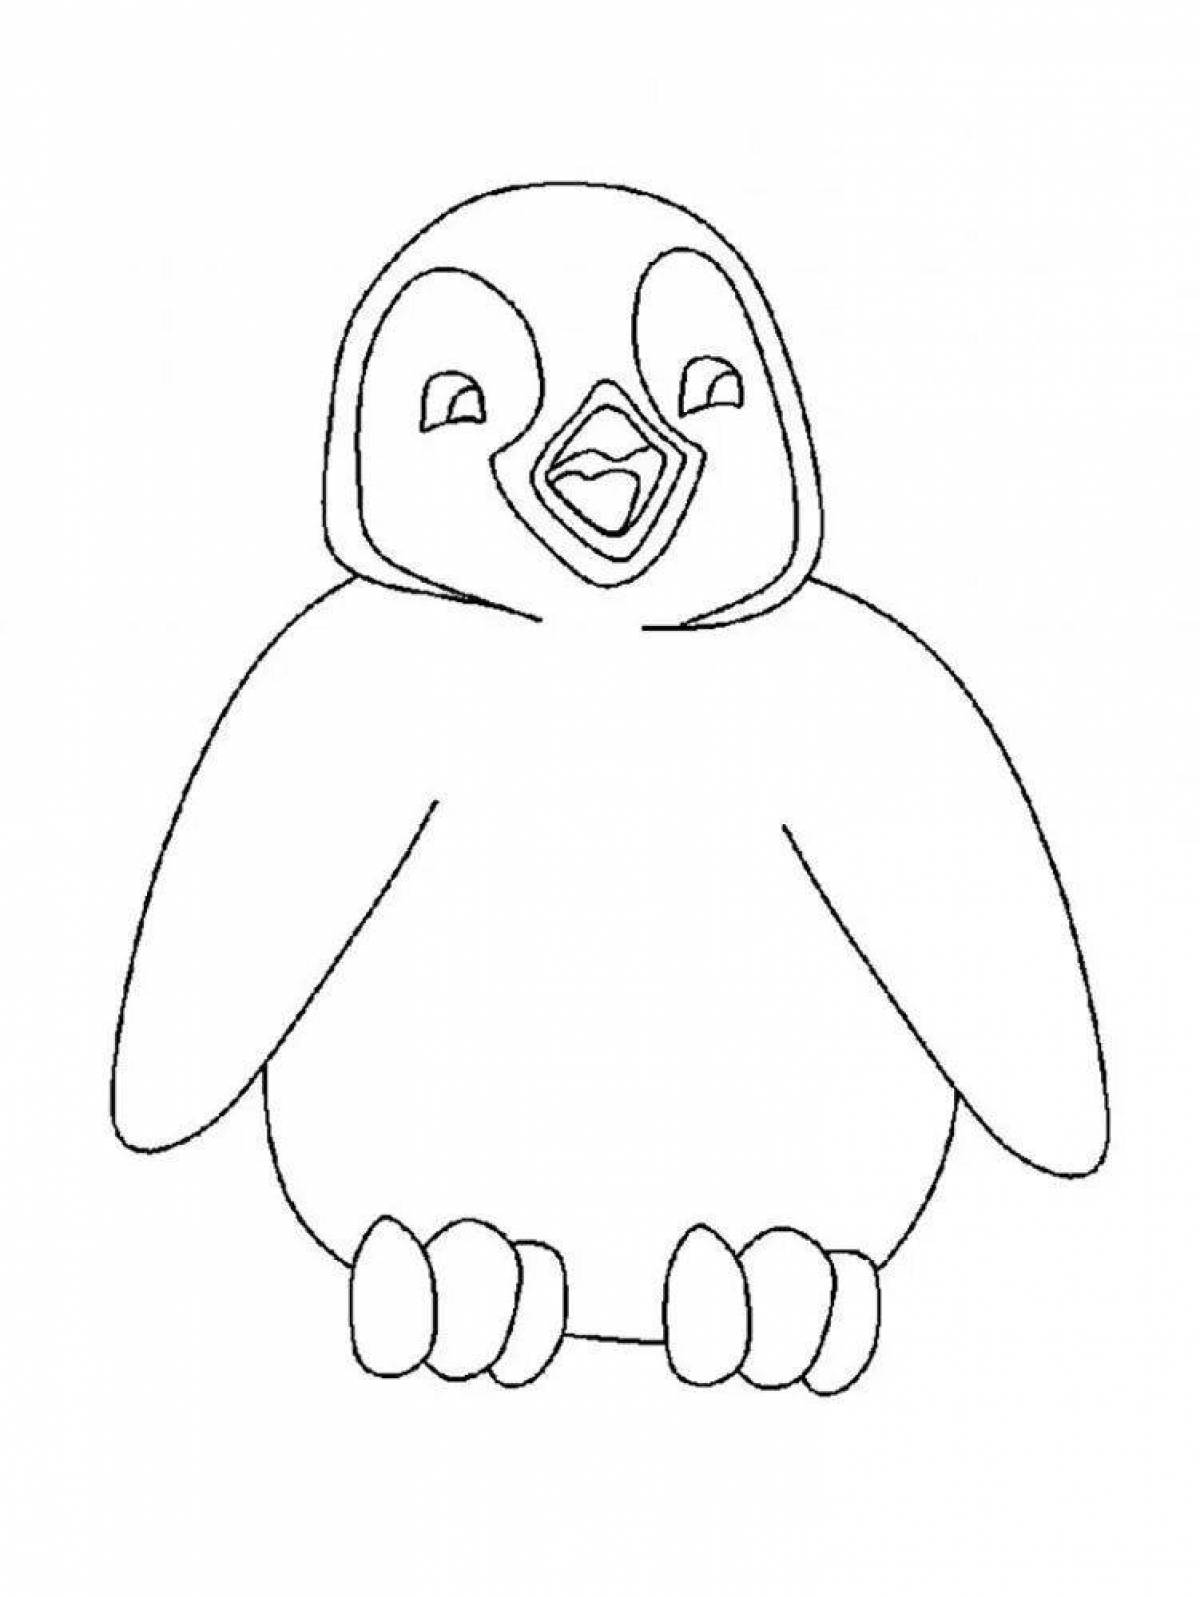 An intriguing drawing of a penguin